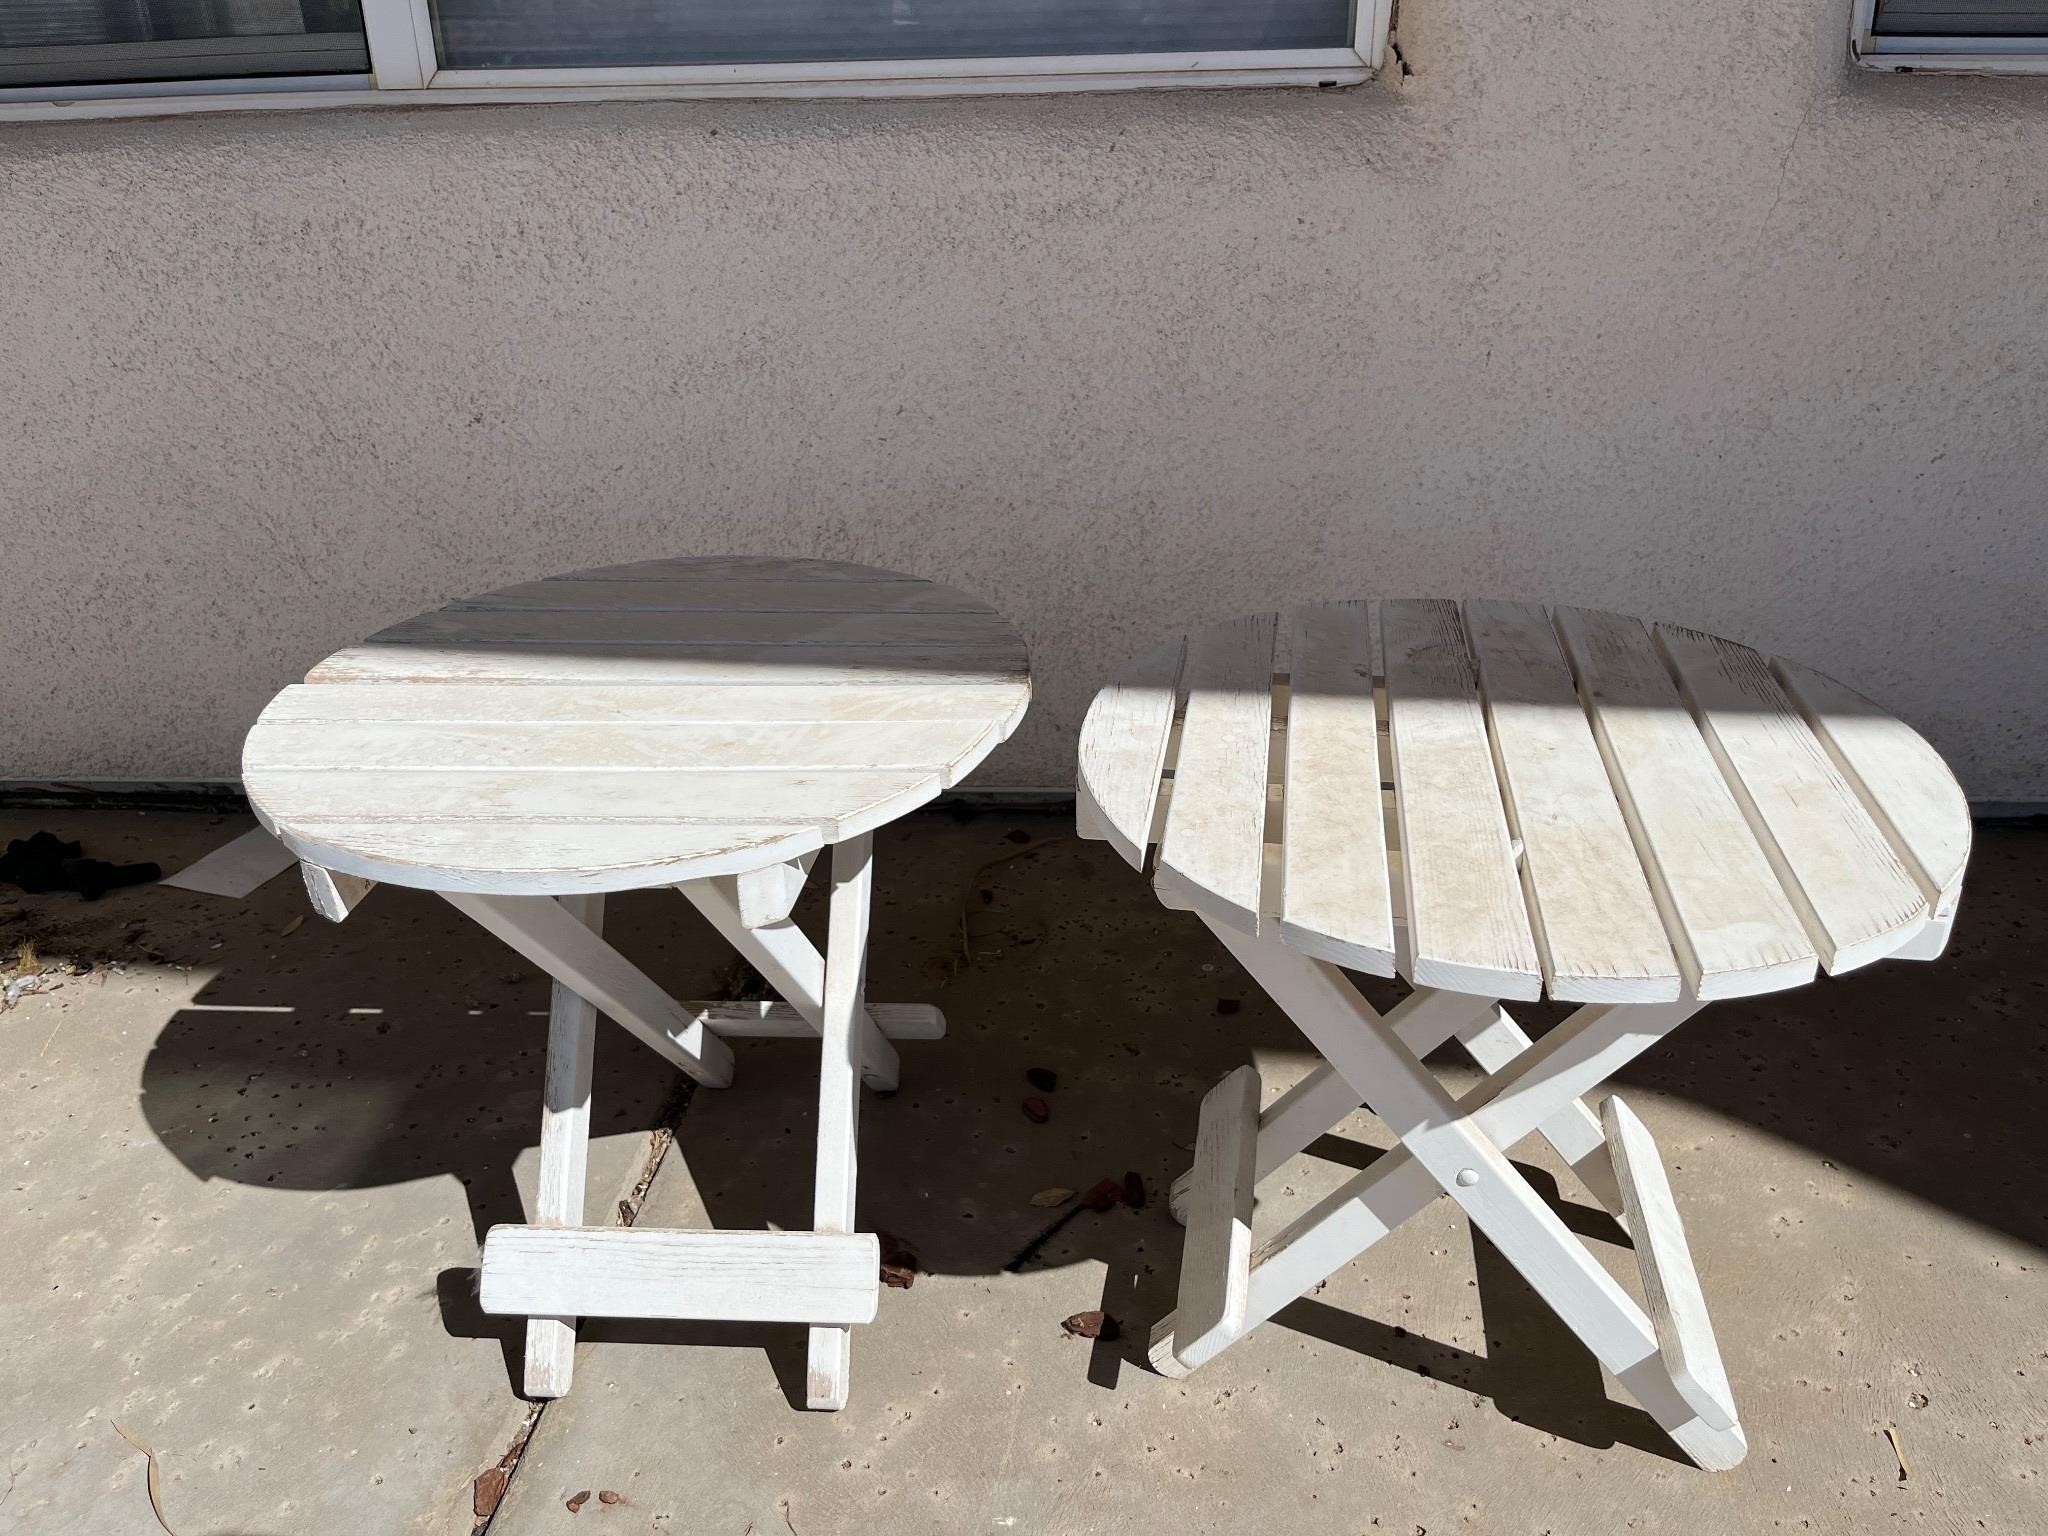 2 Painted Wood Folding Side Tables